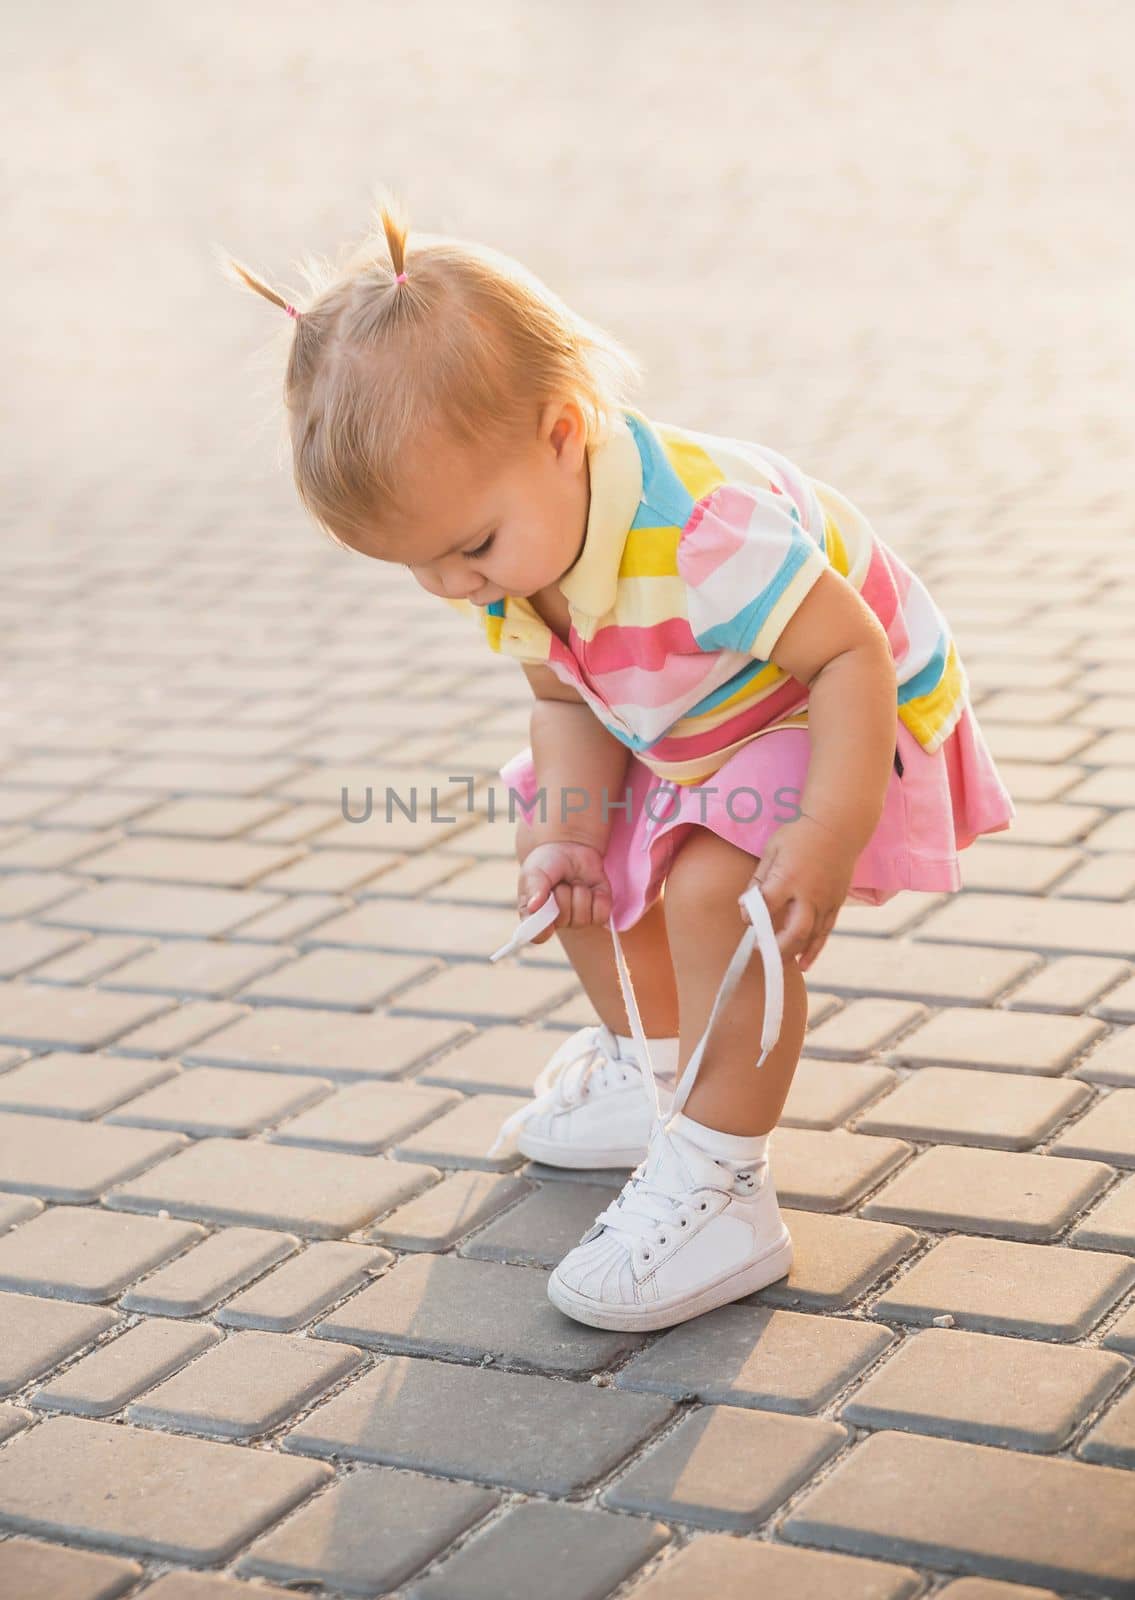 fair-haired baby in tennis clothes ties shoelaces at sunset.